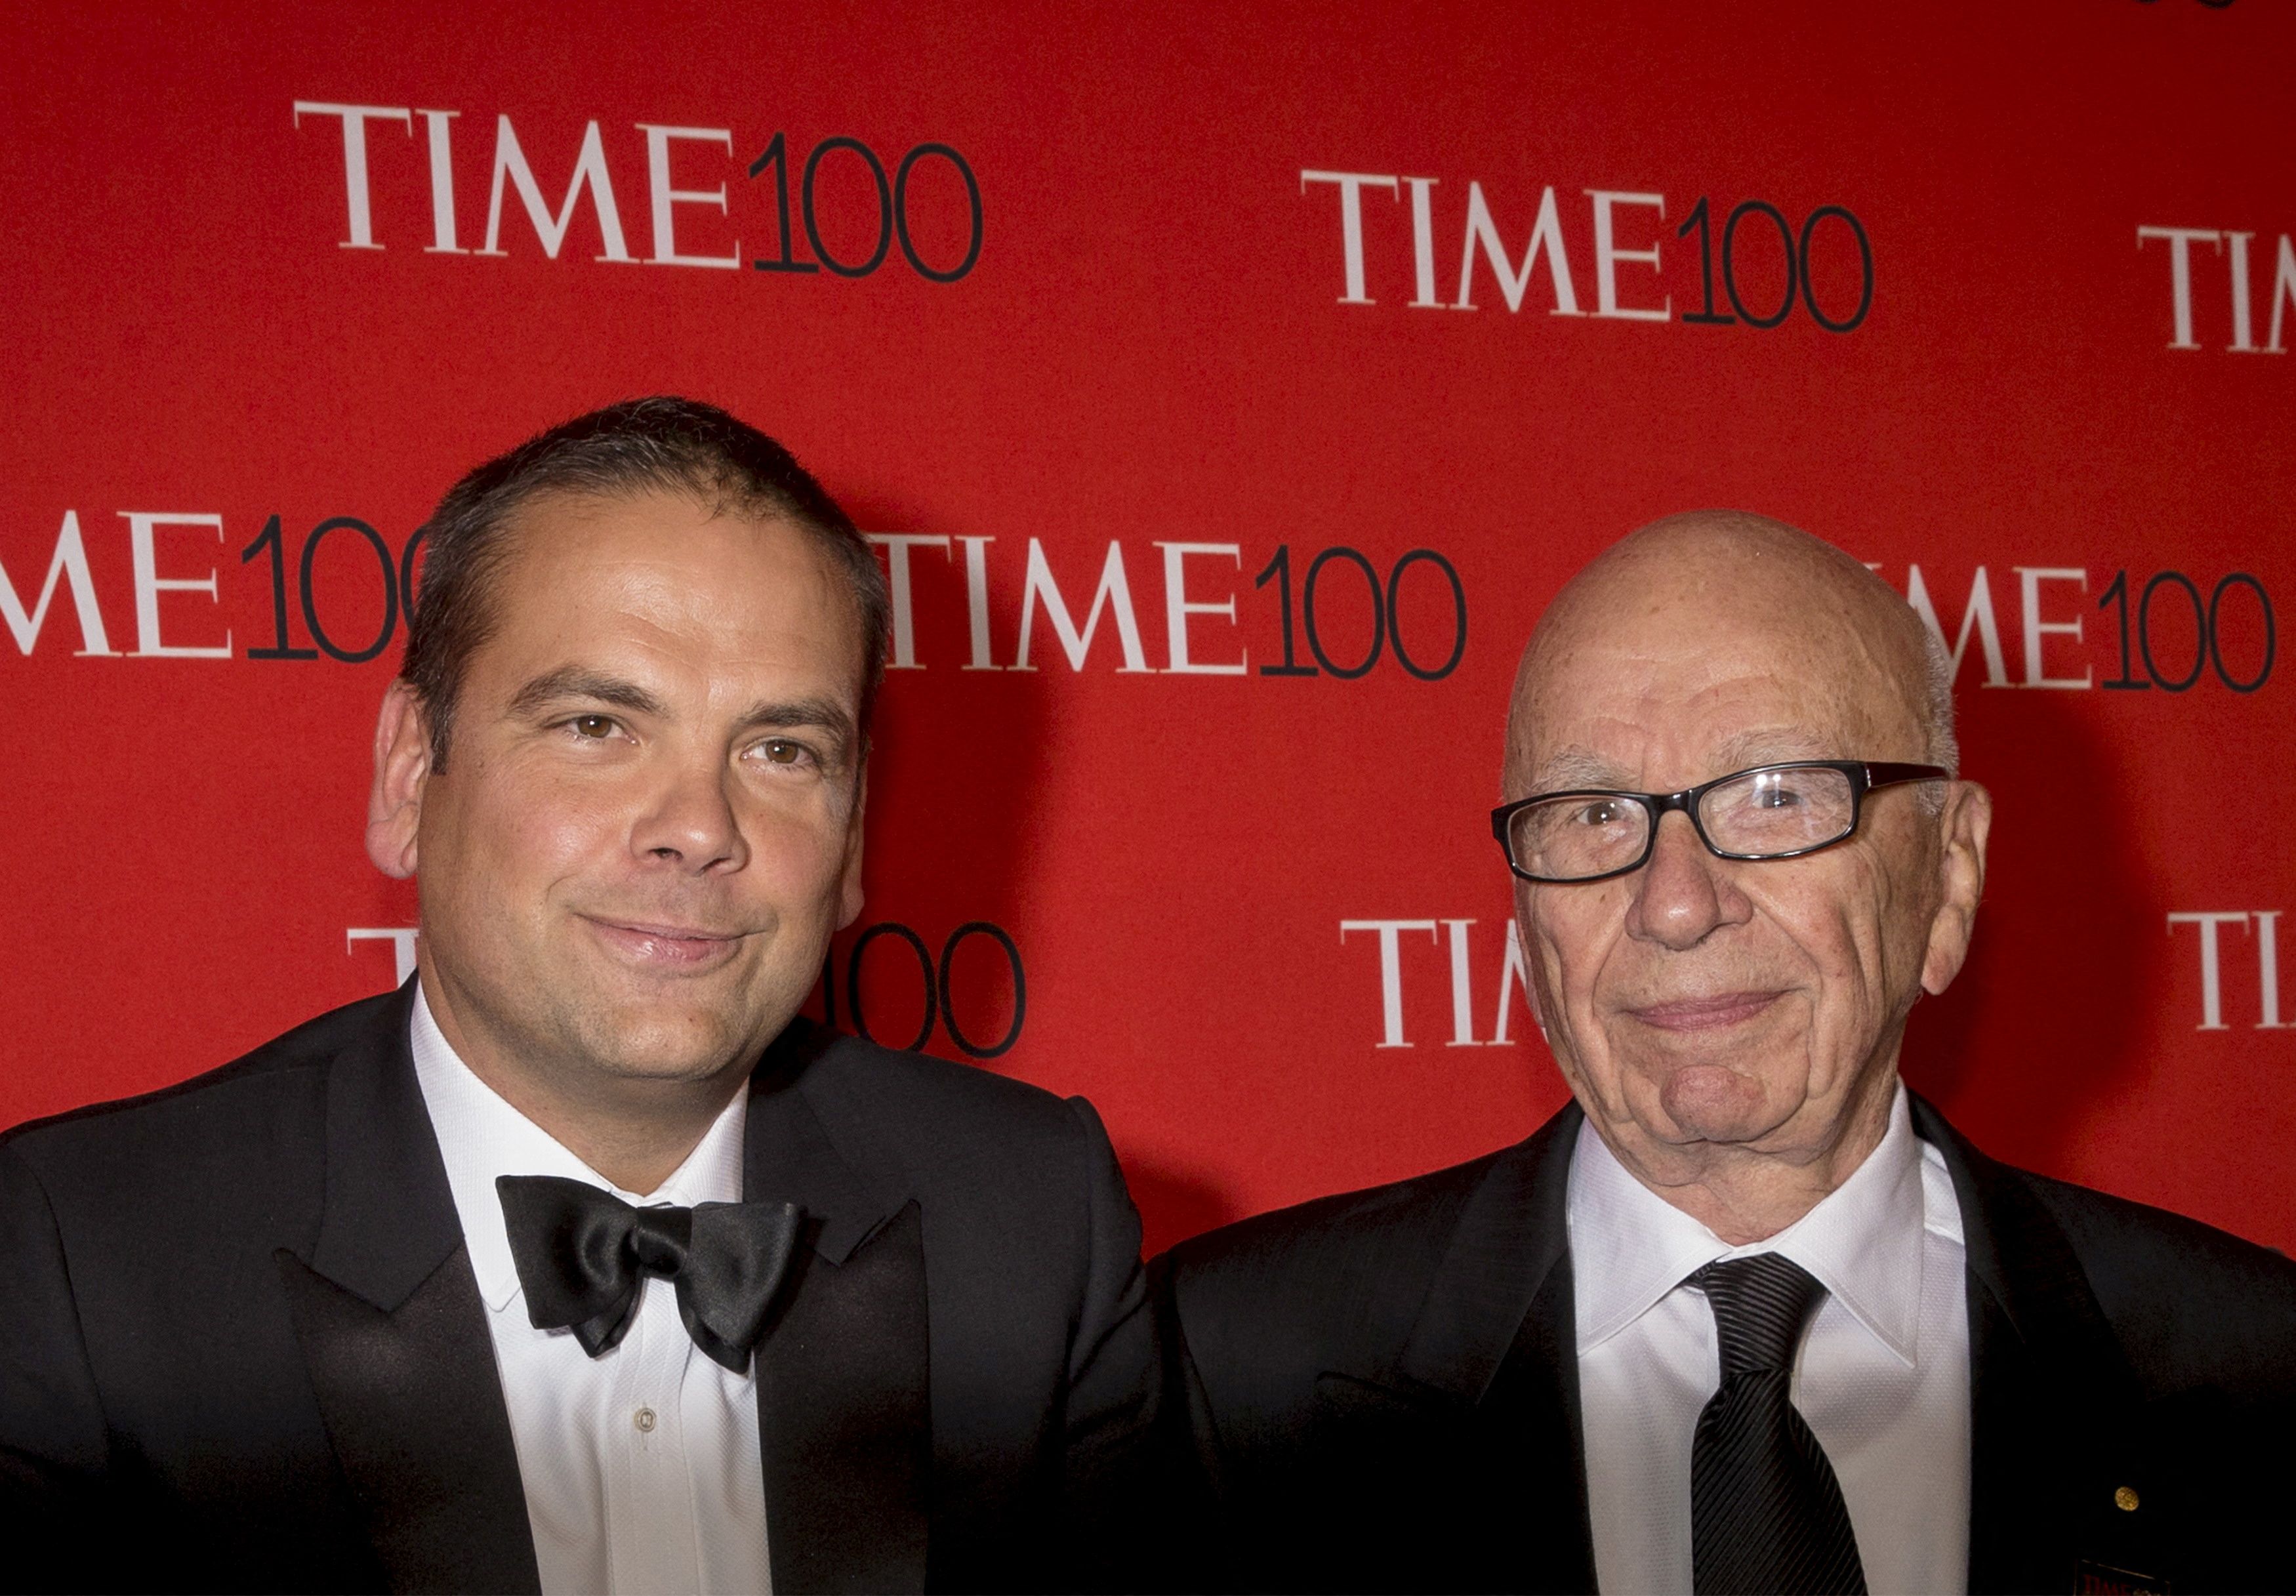 Rupert Murdoch and Lachlan Murdoch arrive for the TIME 100 Gala in New York